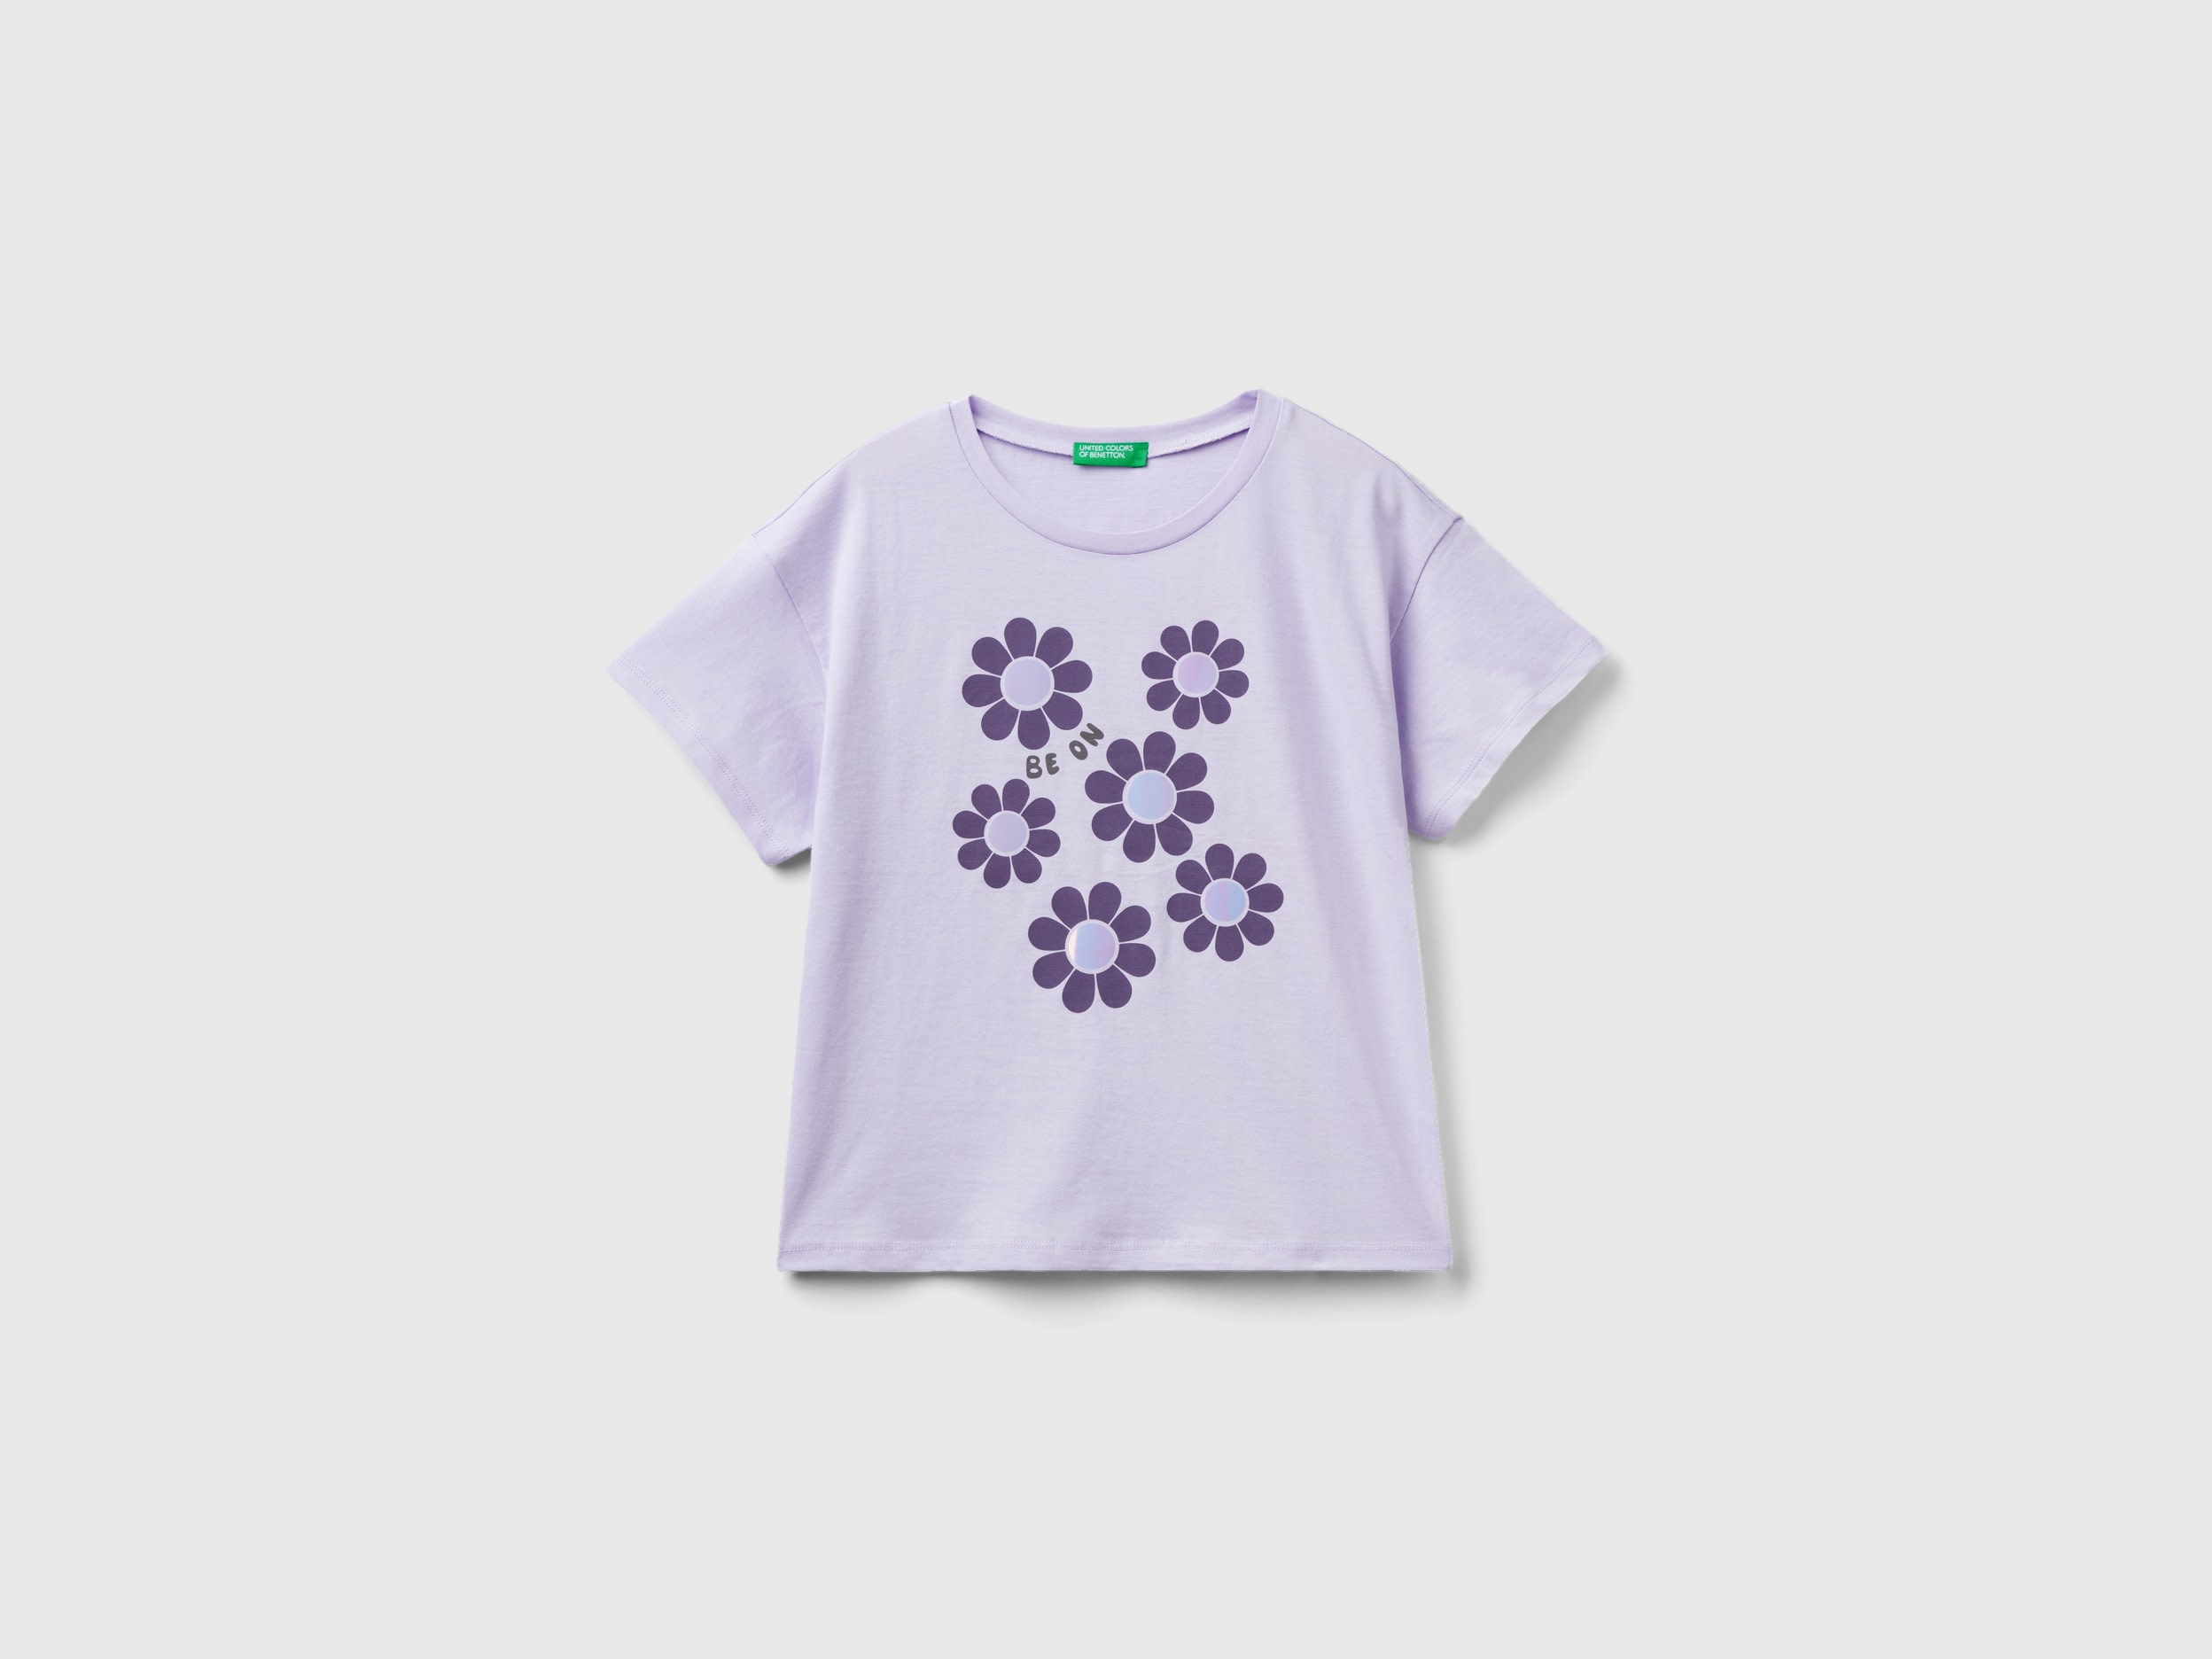 Benetton, Short Sleeve T-shirt With Print, size XL, Lilac, Kids